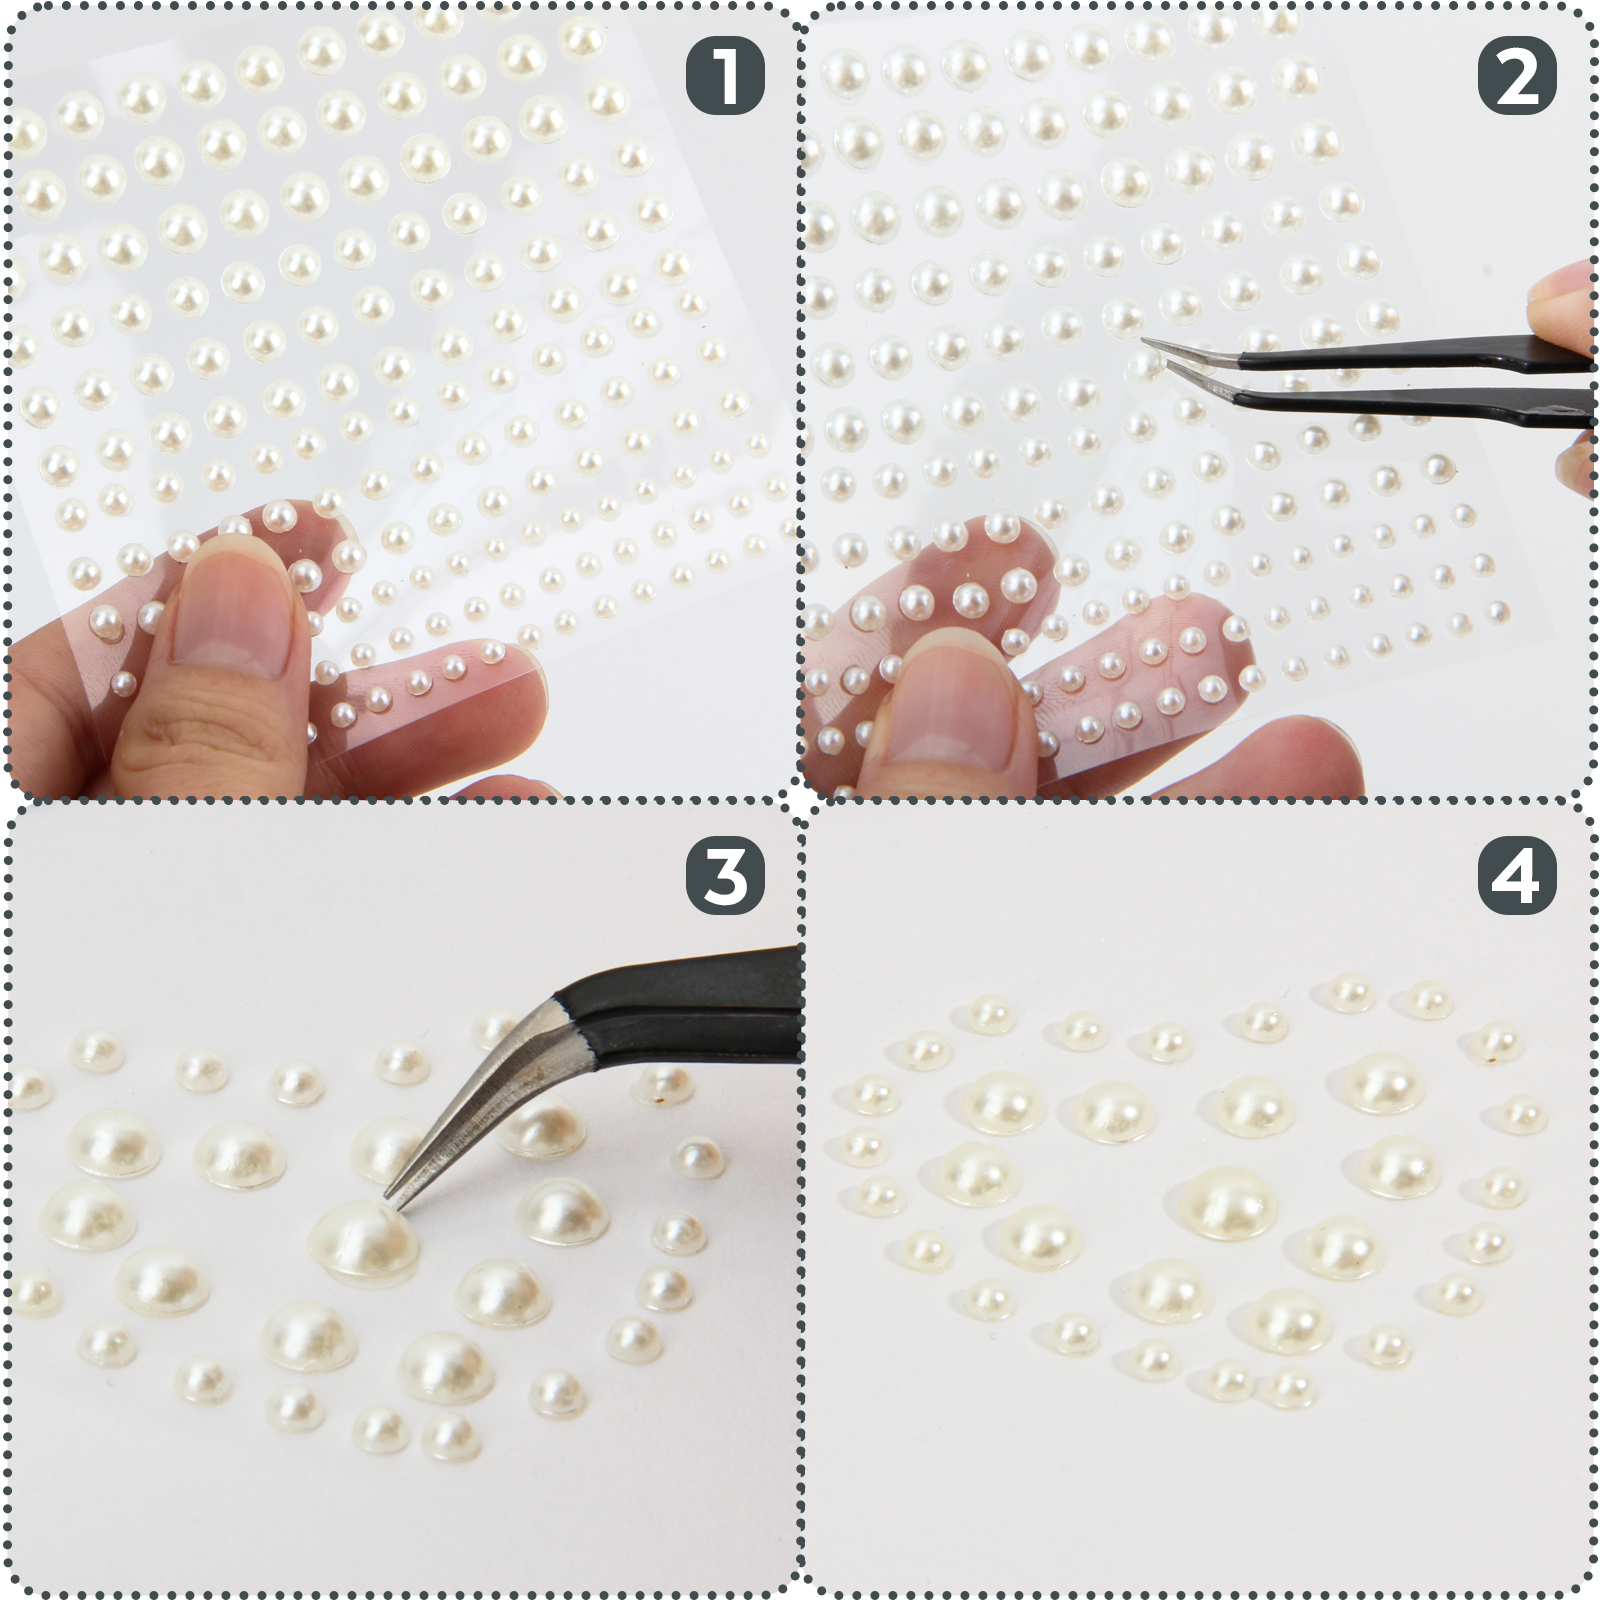 2475 PCS Pearl Stickers Self Adhesive, Nicpro 4 Size Stick On Makeup Pearl Gem White Jewel Decor for Face, Body, Nail, Hair, Phone Art Craft Scrapbooking Embellishments Assorted Size 3mm/4mm/5mm/6mm